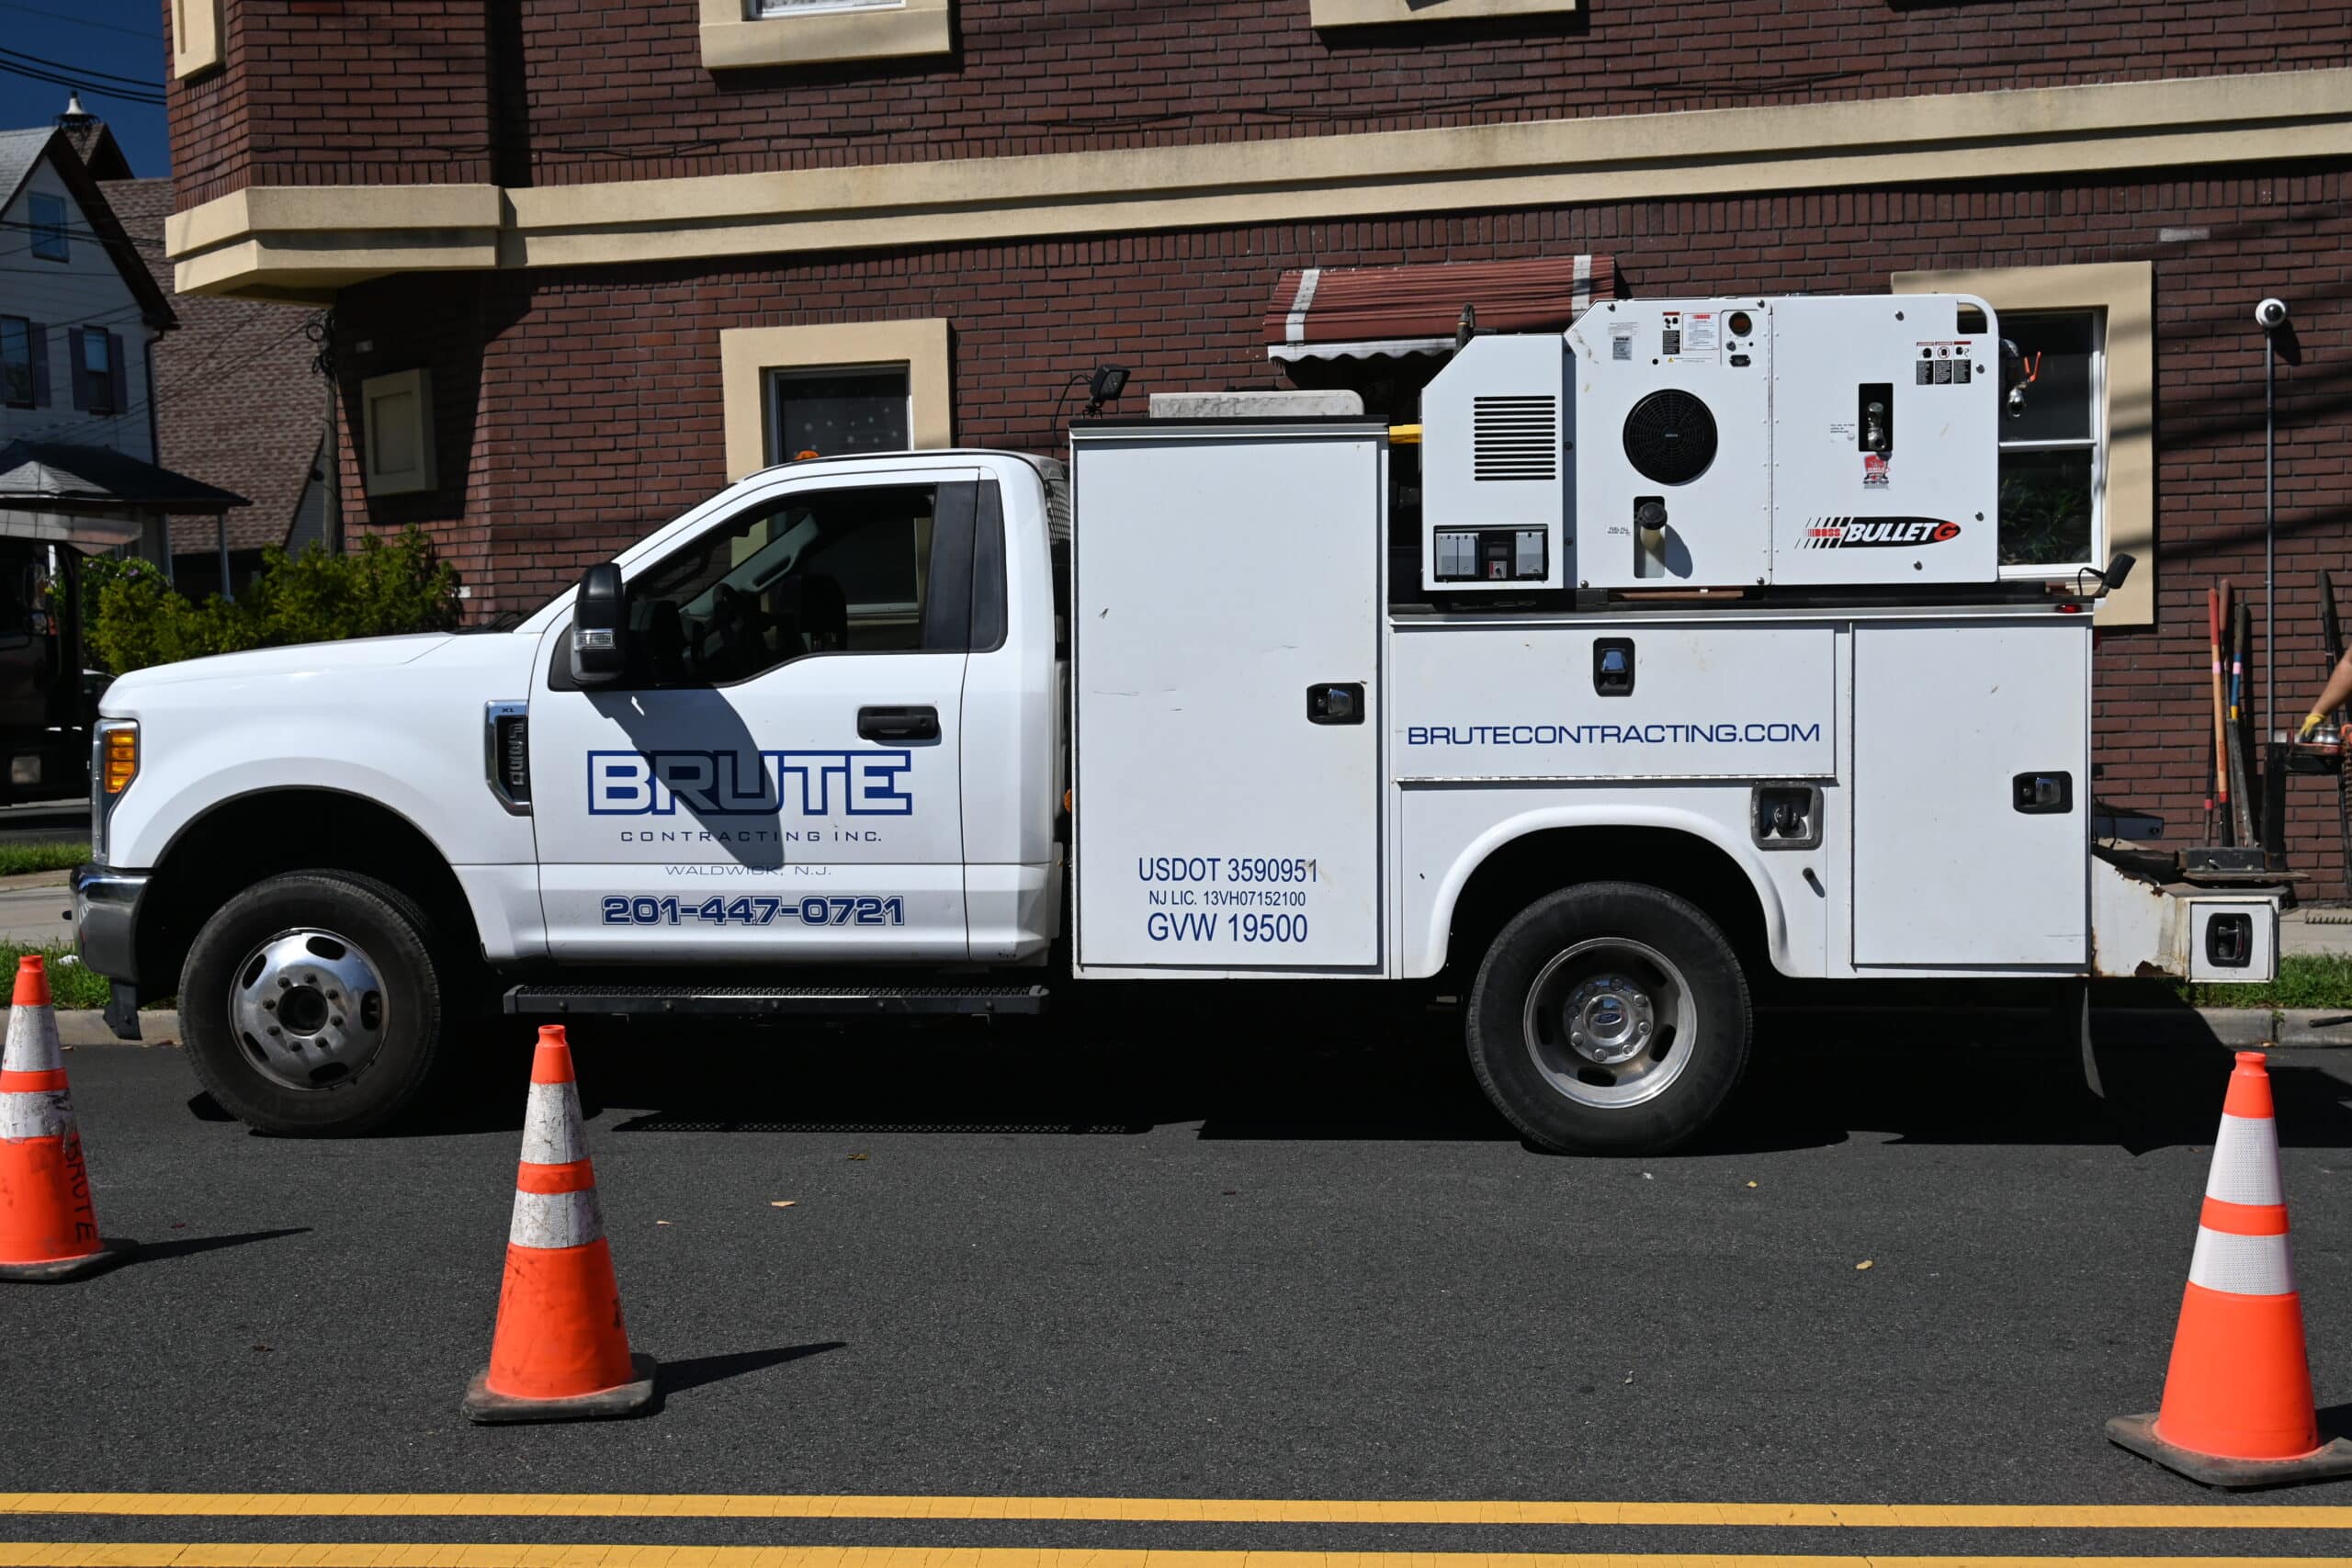 BRUTE Contracting truck in front of a residential apartment building